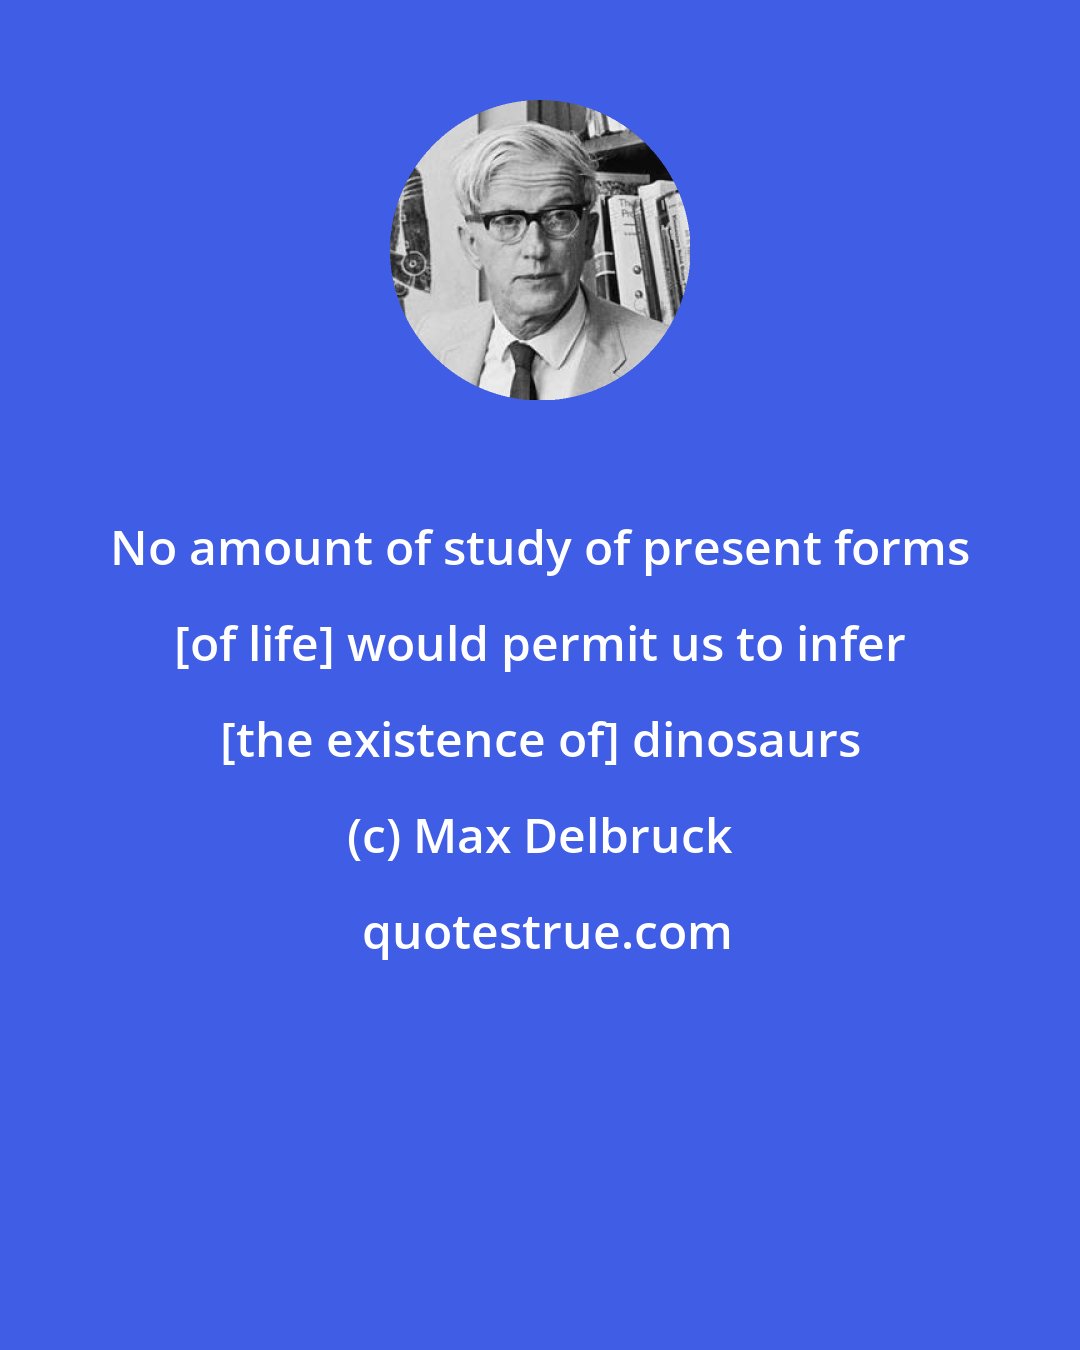 Max Delbruck: No amount of study of present forms [of life] would permit us to infer [the existence of] dinosaurs